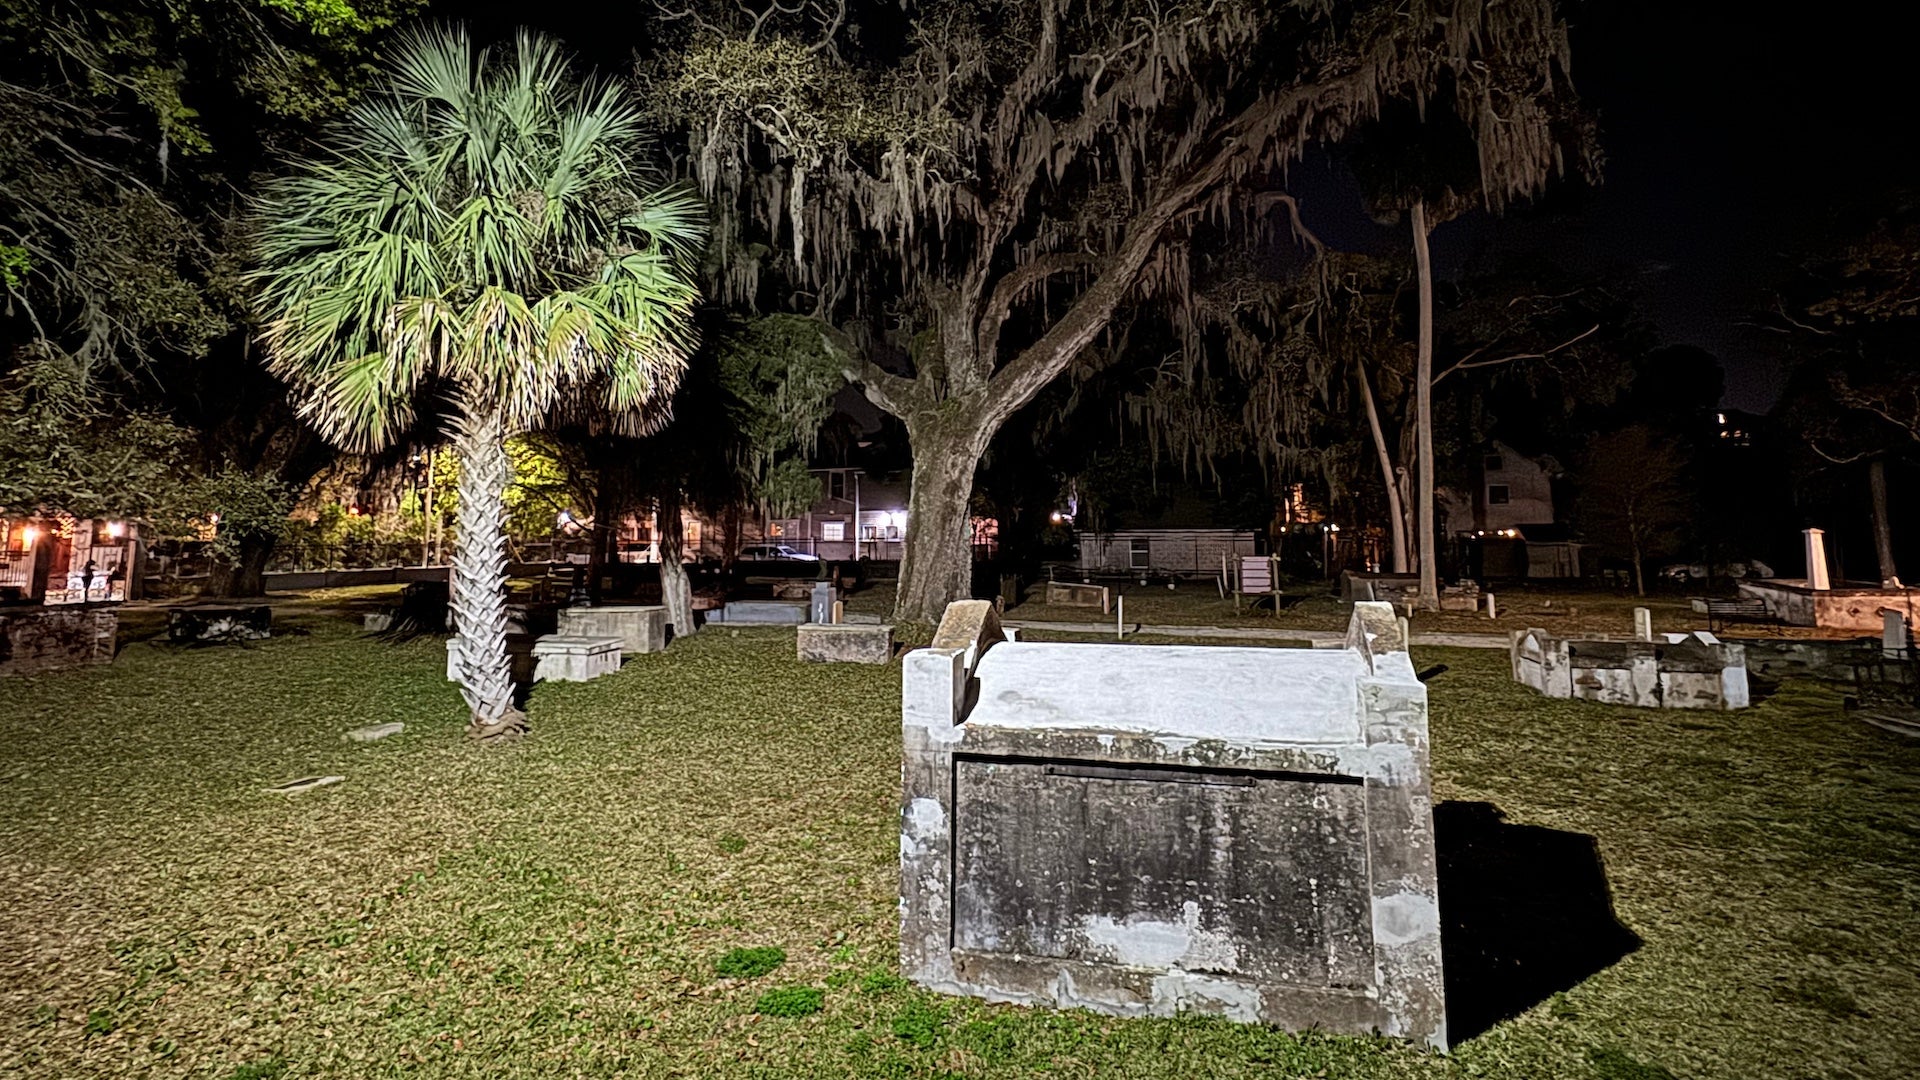 Cemetery at night with a palm tree and a large oak